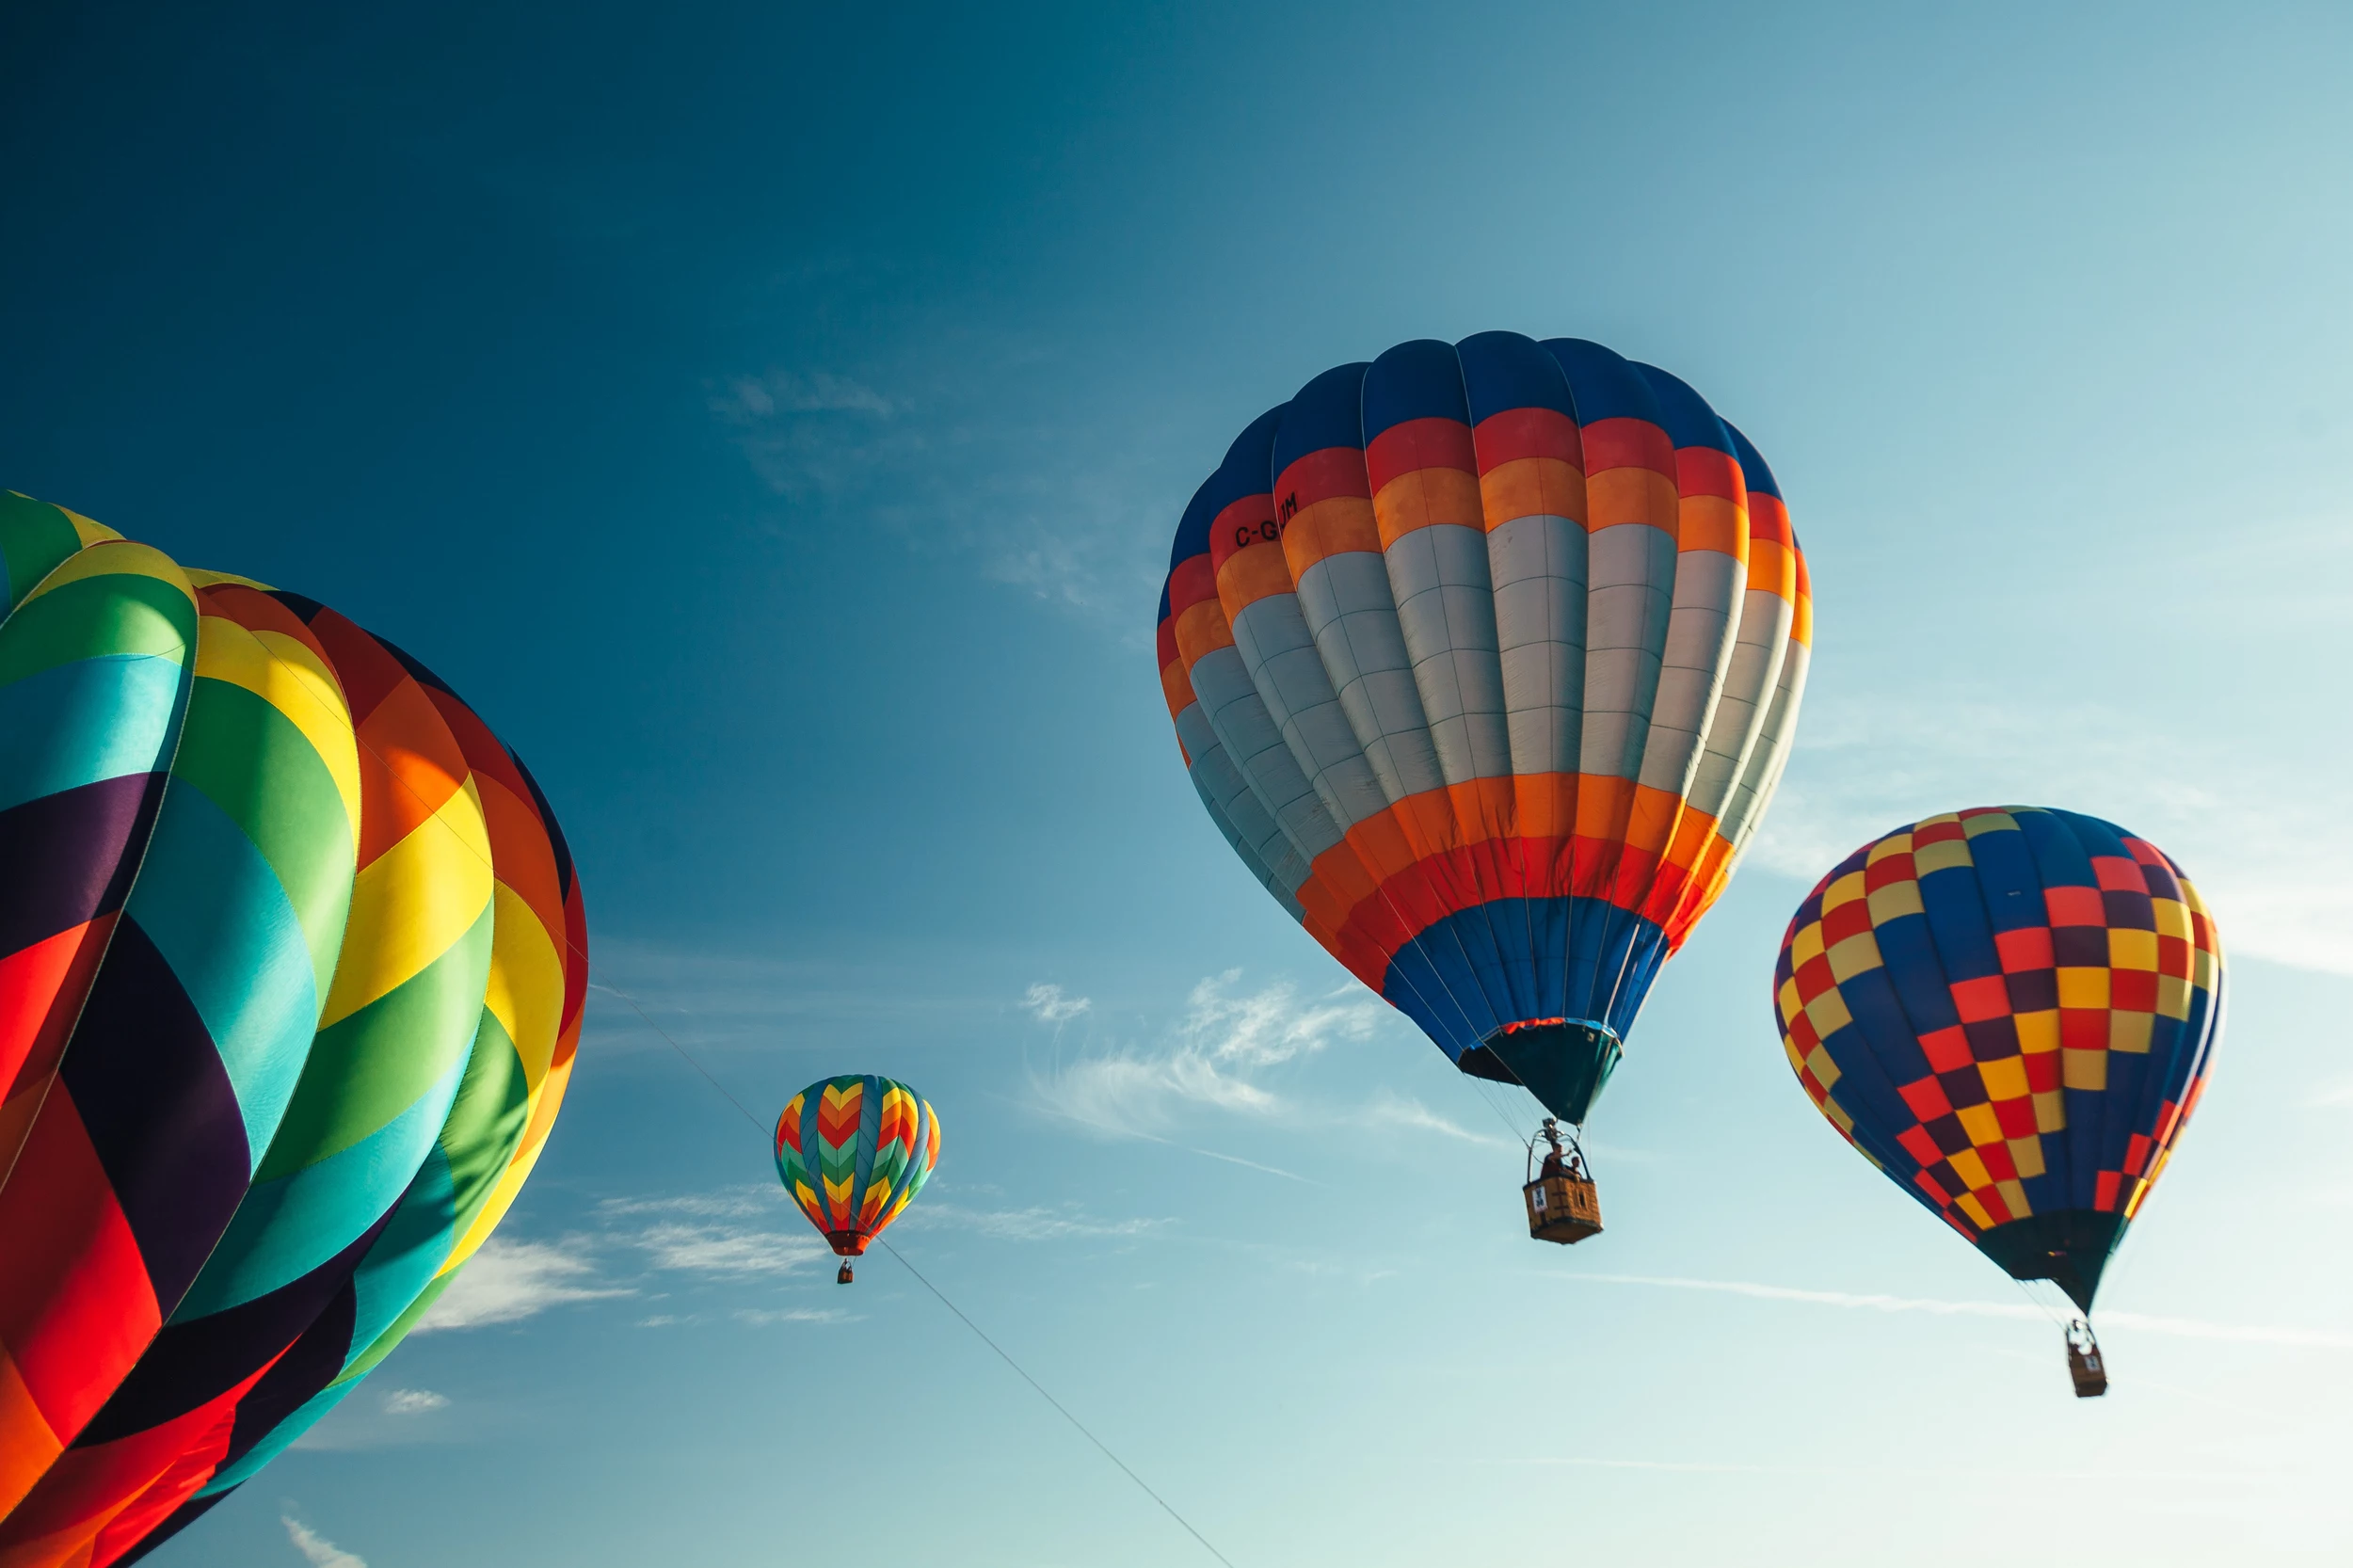 Philly Balloon & Music Fest 2022 Takes Flight in Chester County